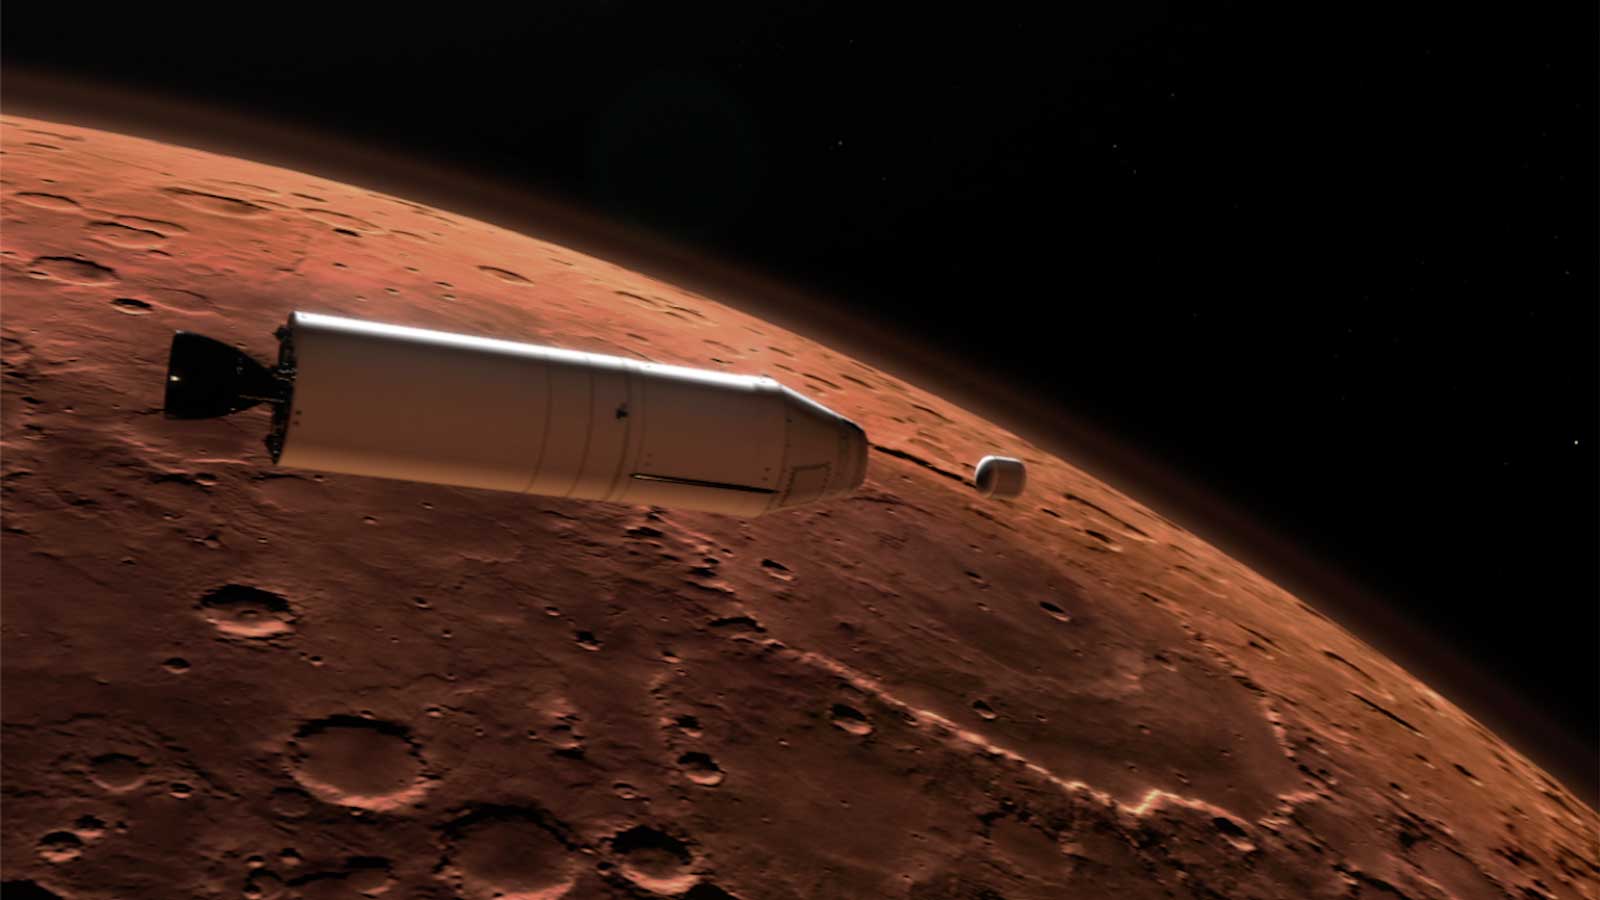 As part of a Mars sample return mission, a rocket will carry a container of sample tubes with Martian rock and soil samples into orbit around Mars and release it for pick up by another spacecraft.